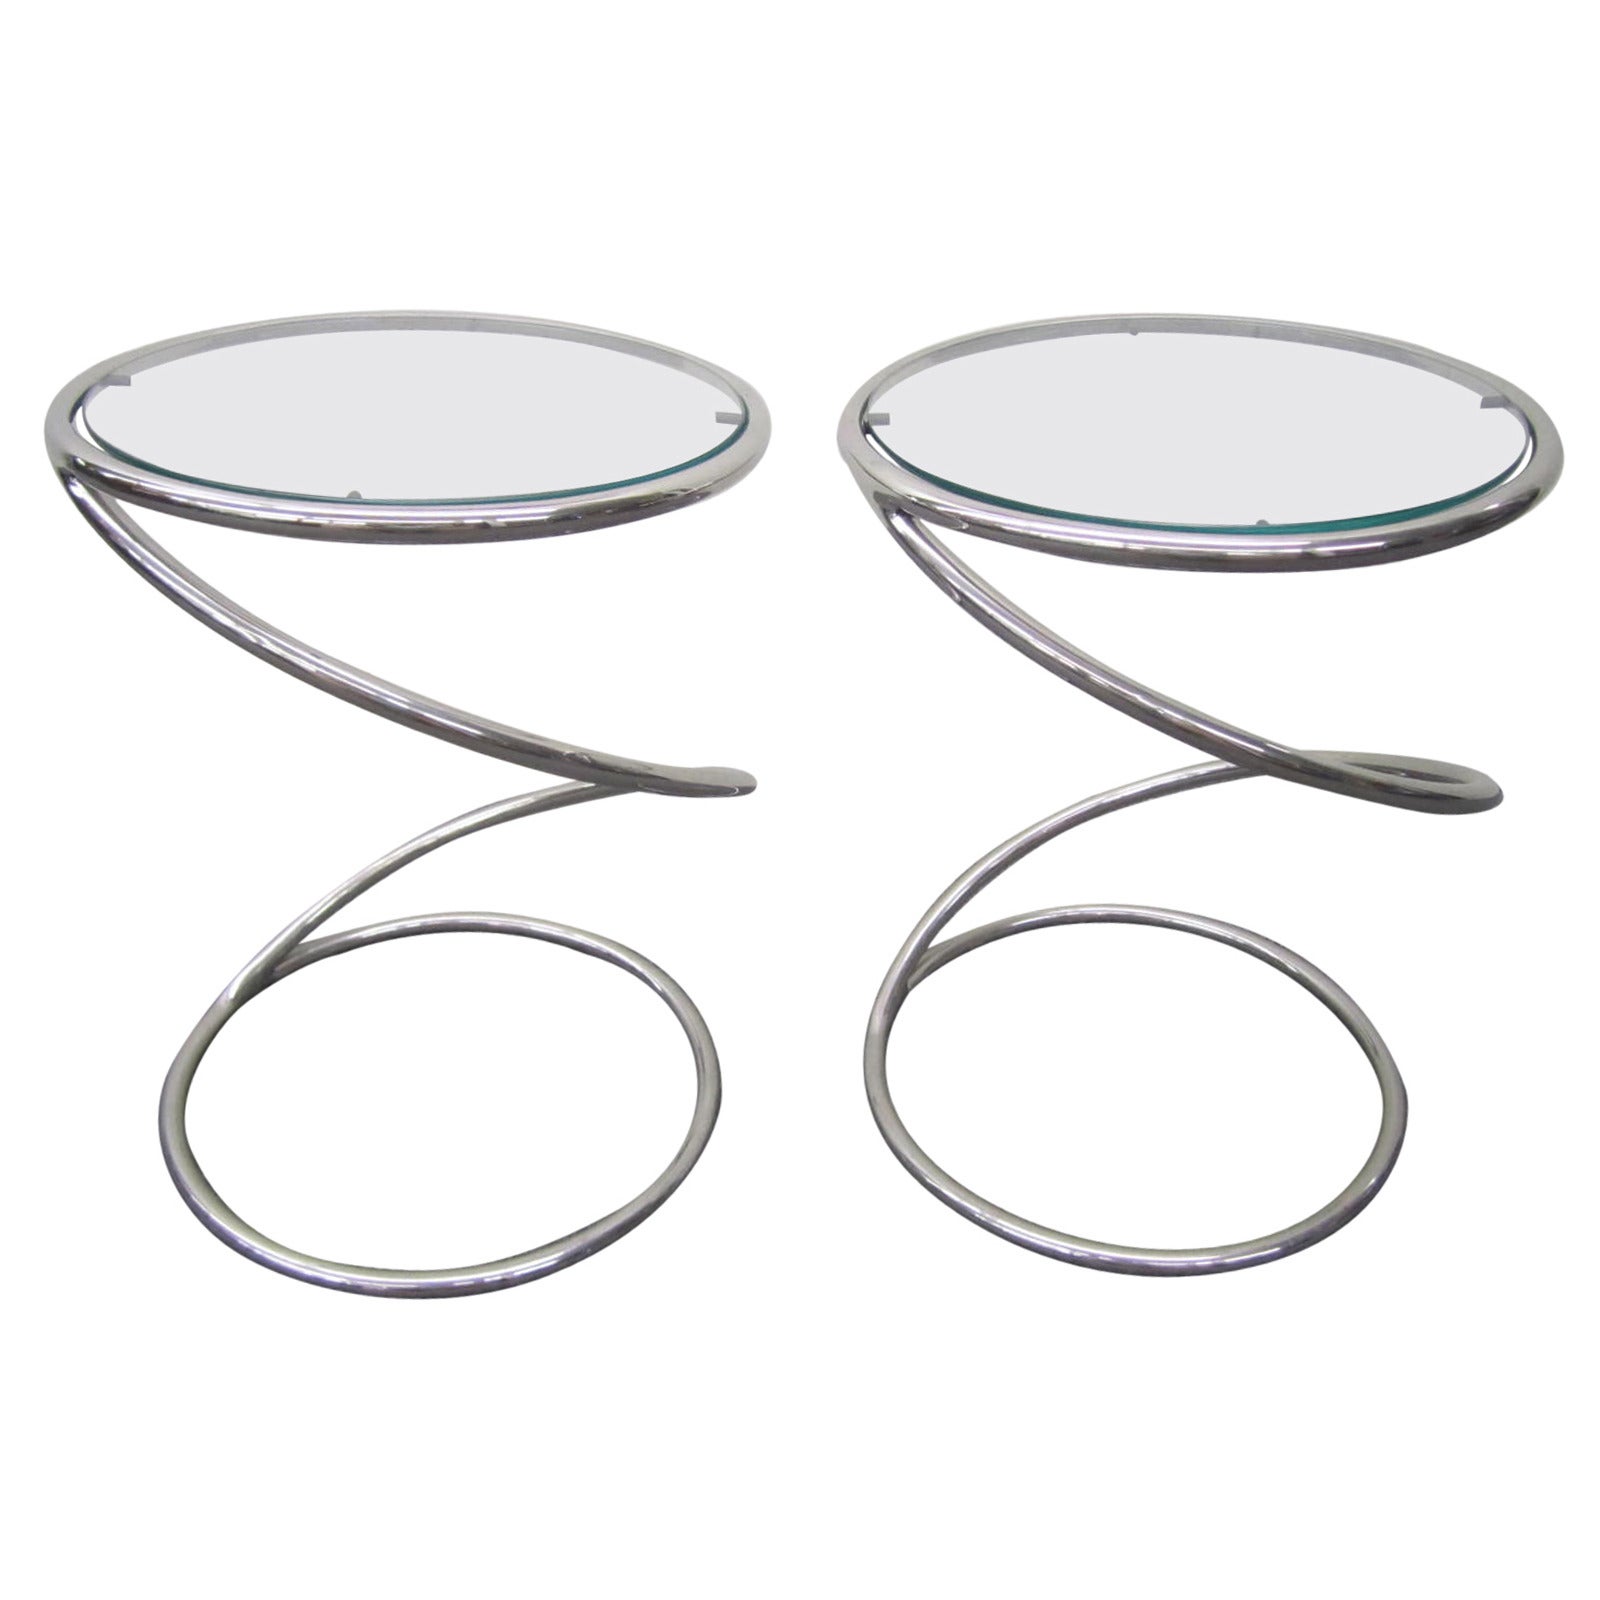 Stunning Pair of Chrome Pace Collection Spring Side Tables, Mid-Century Modern For Sale